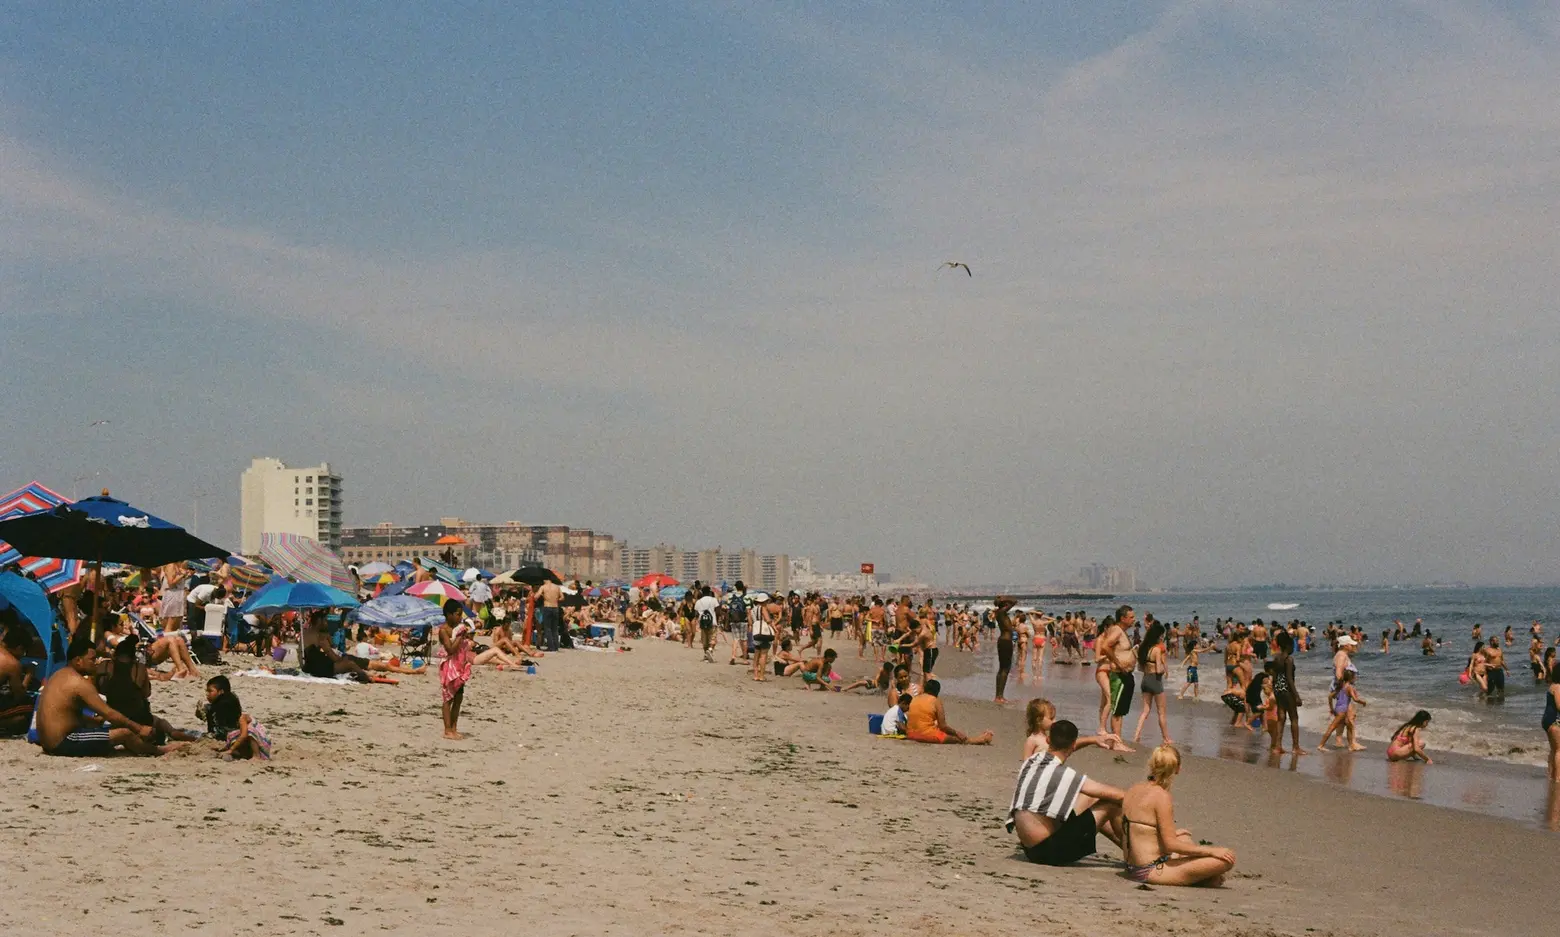 Starting this weekend, you can get a Covid vaccine at a NYC beach